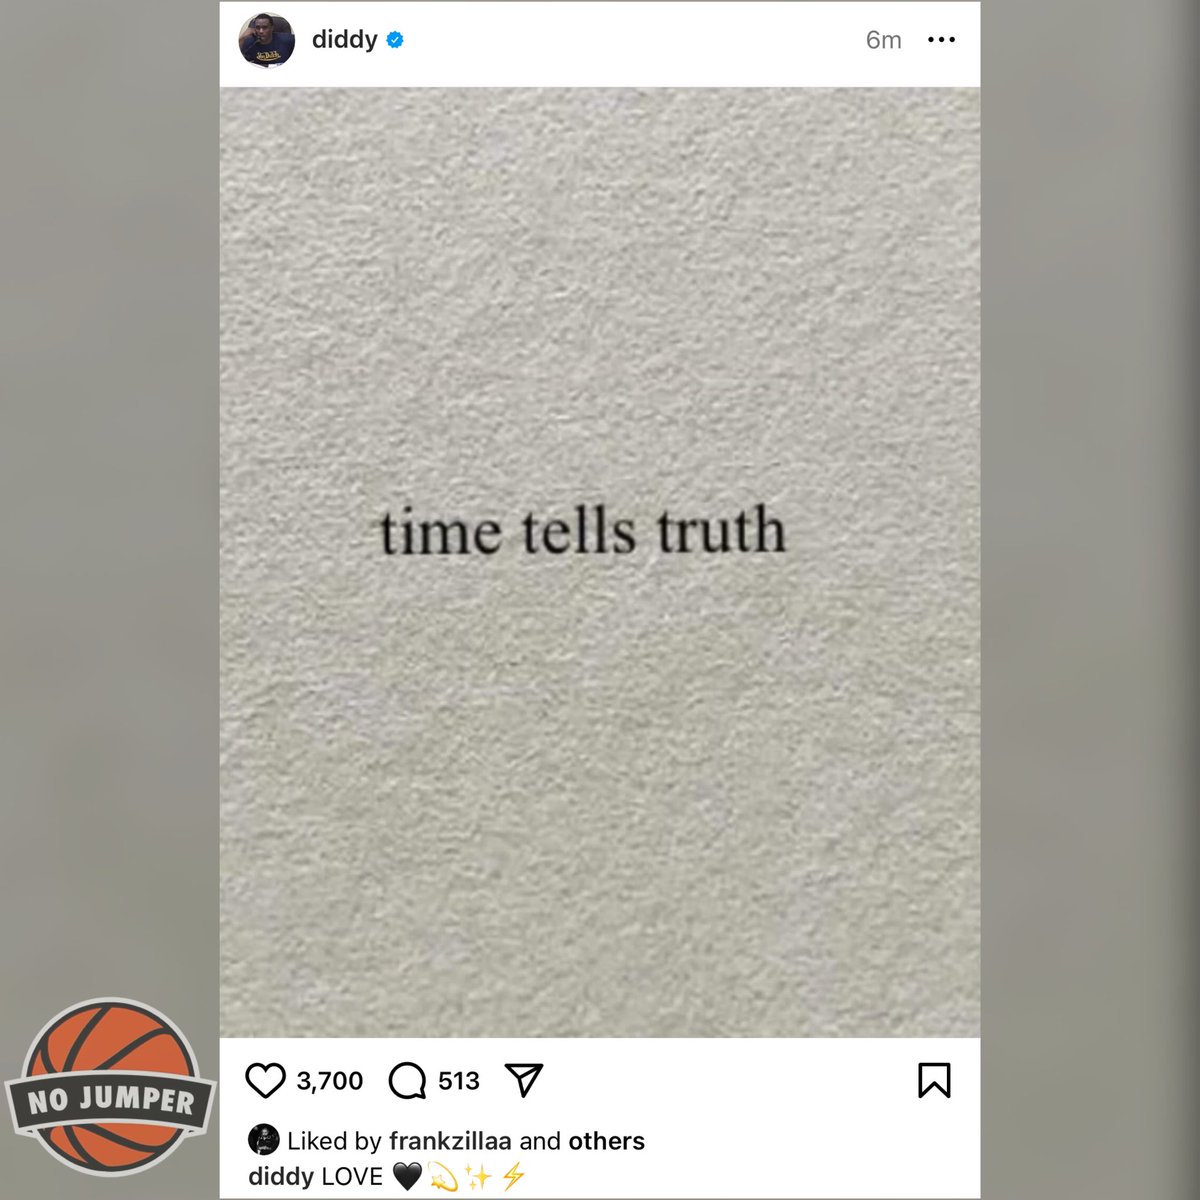 Diddy shares messages amid sex trafficking scandal: “Time tells truth.”